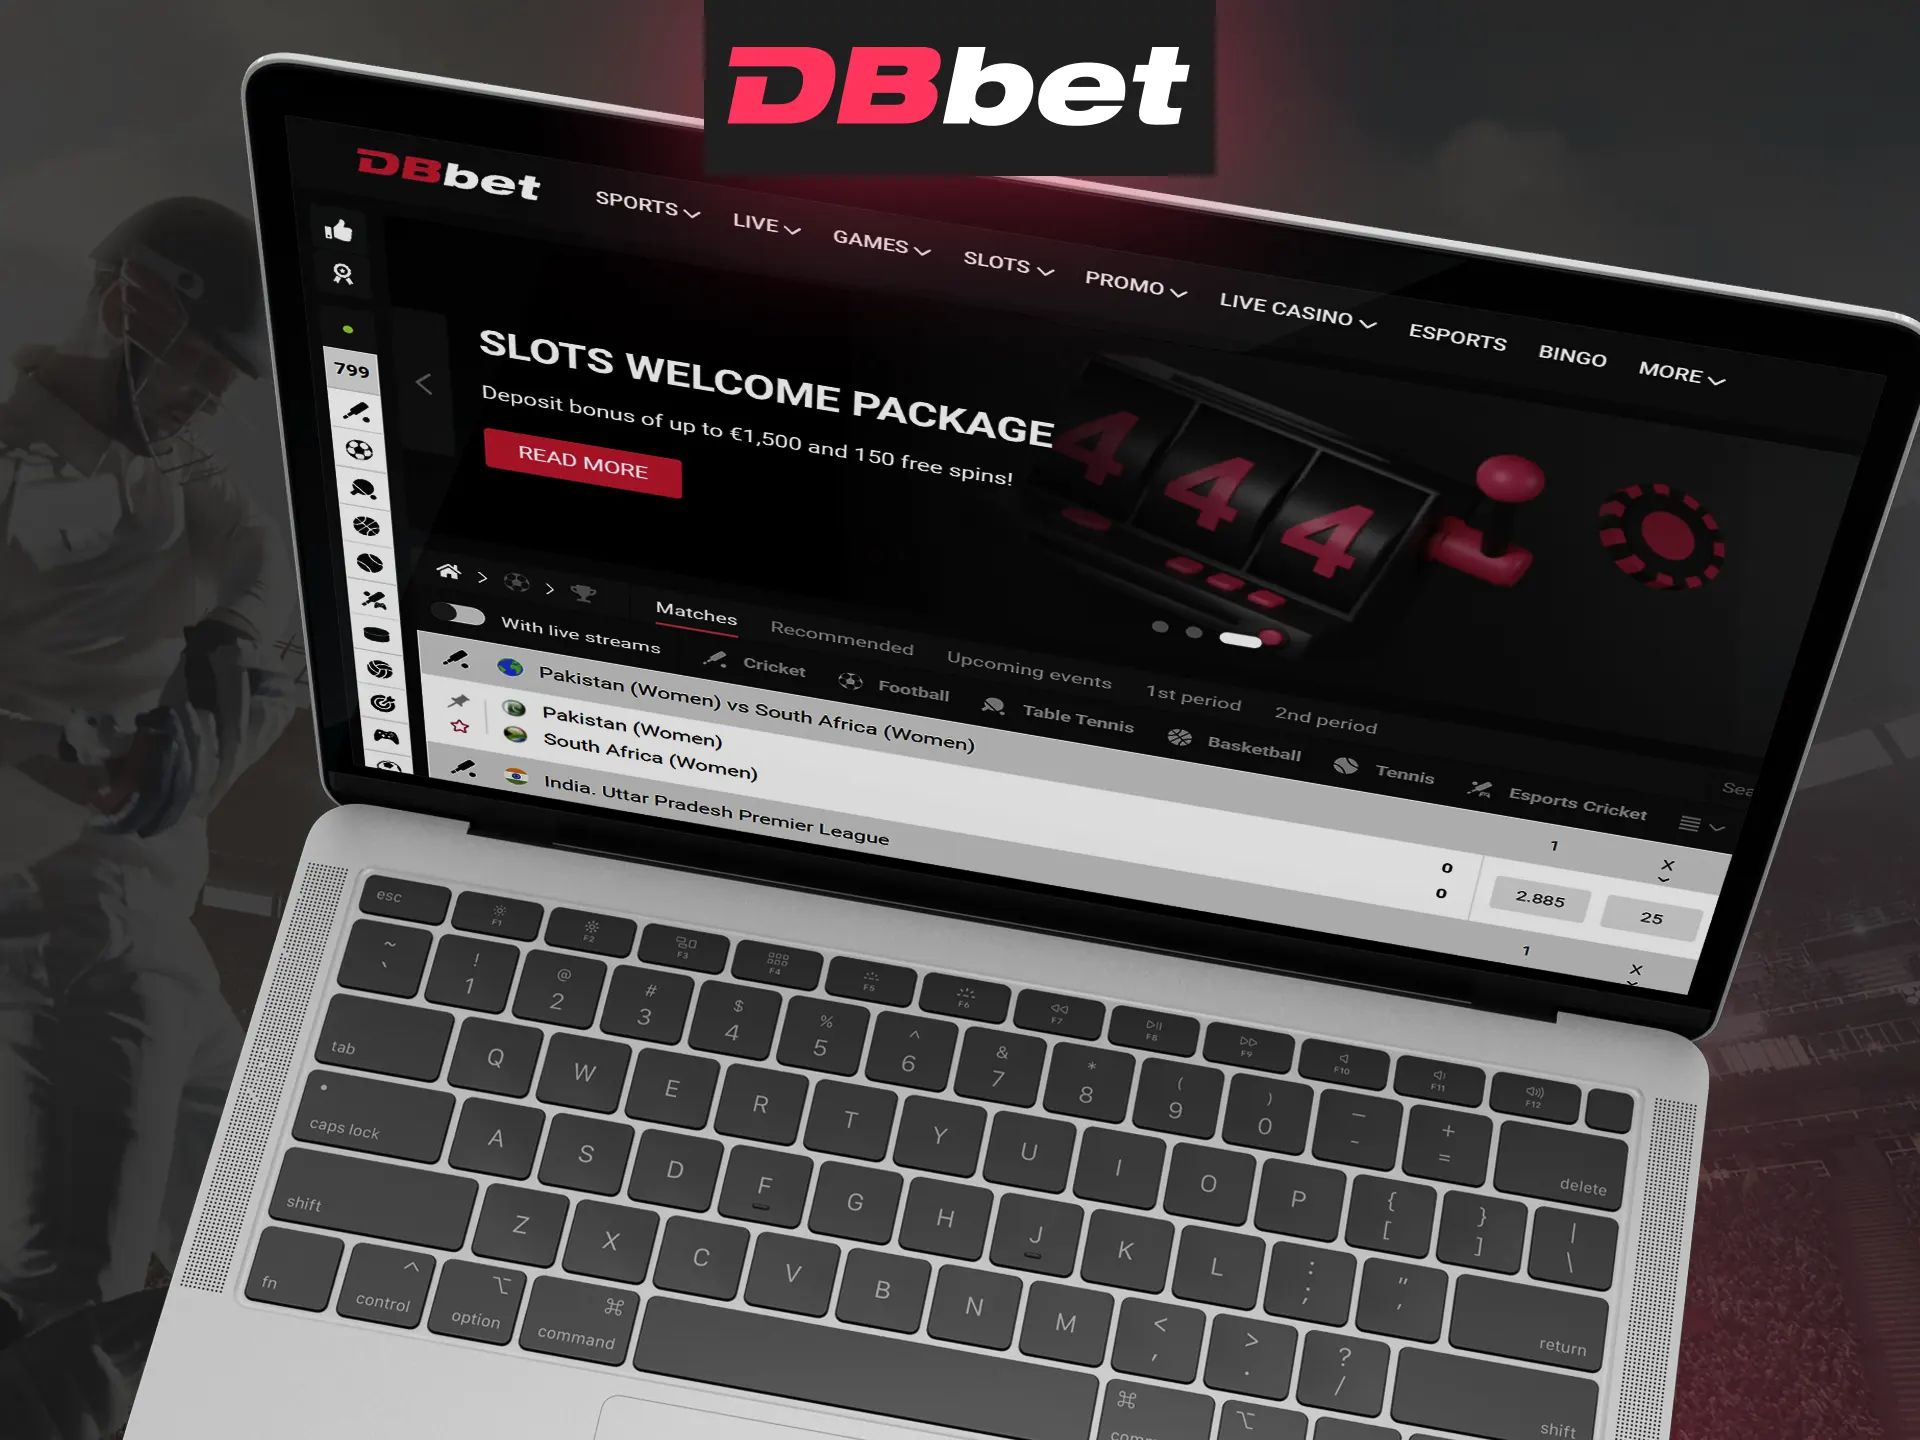 Visit the official website of DB Bet.